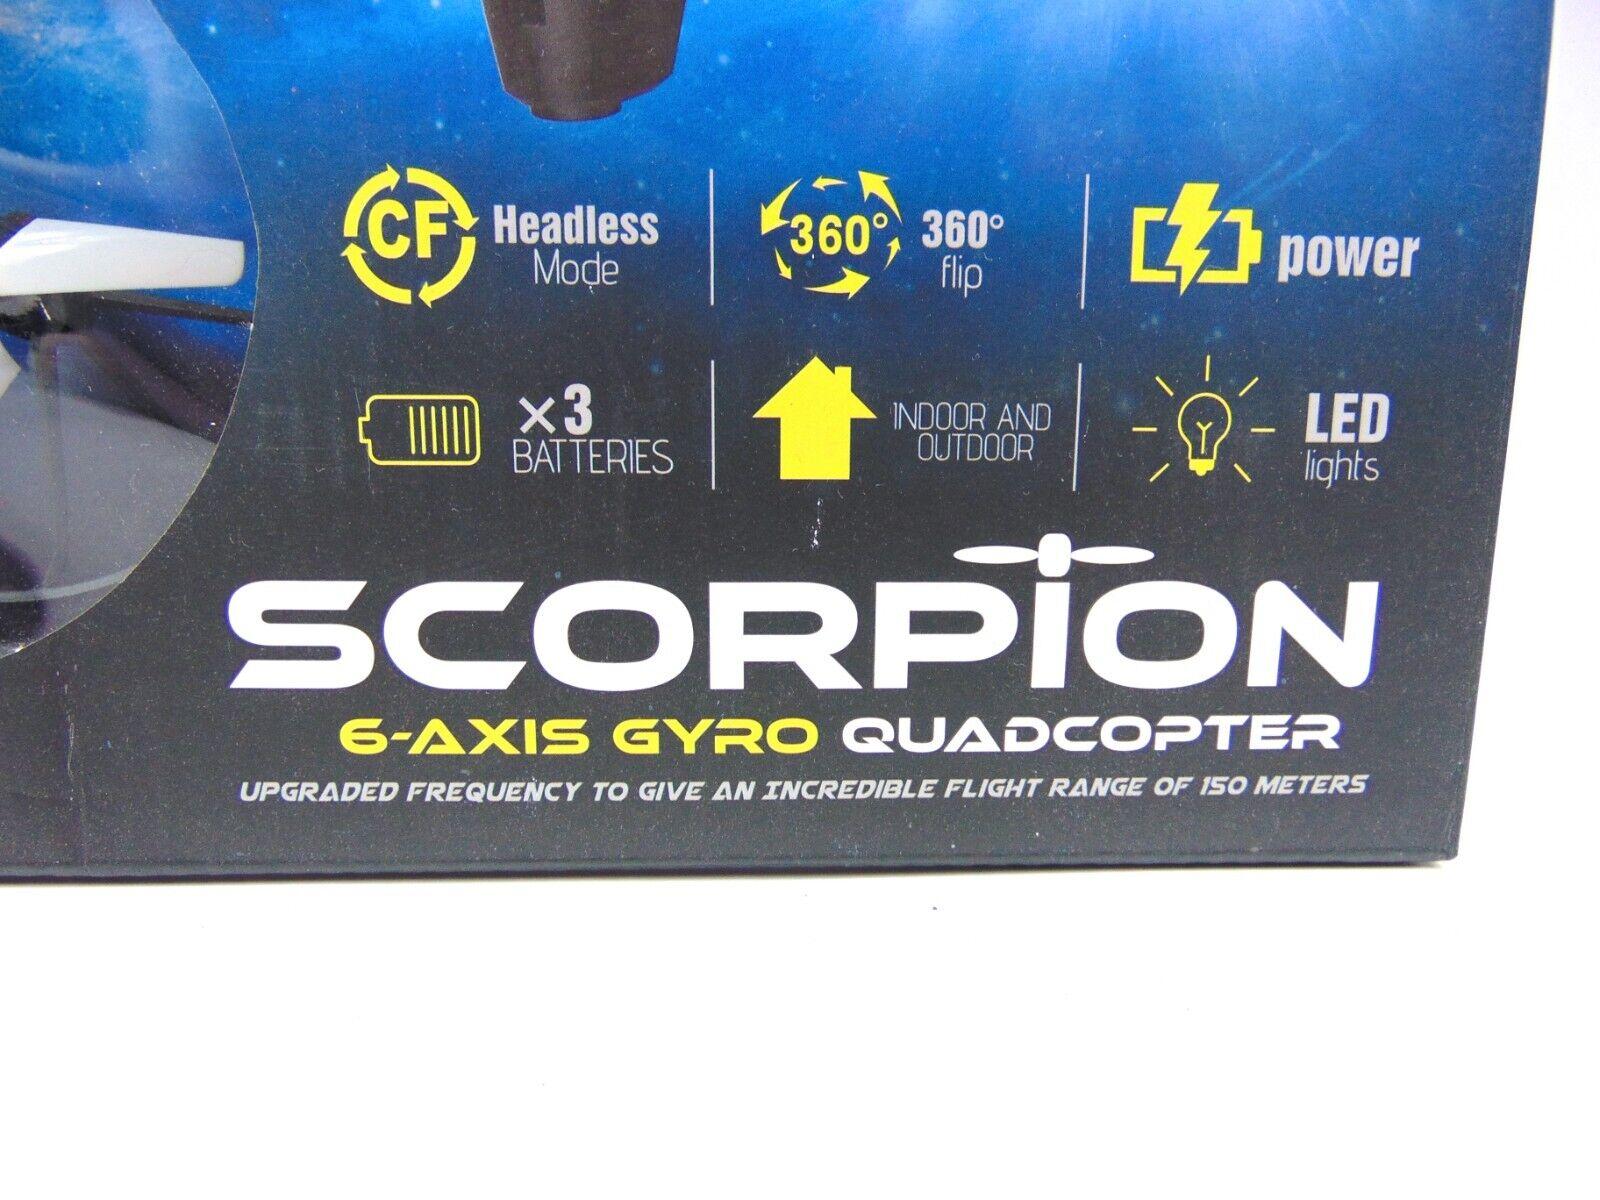 Scorpion 6 Axis Gyro Quadcopter: - The Ultimate Quadcopter for Smooth and Stable Flight: Scorpion 6 Axis Gyro